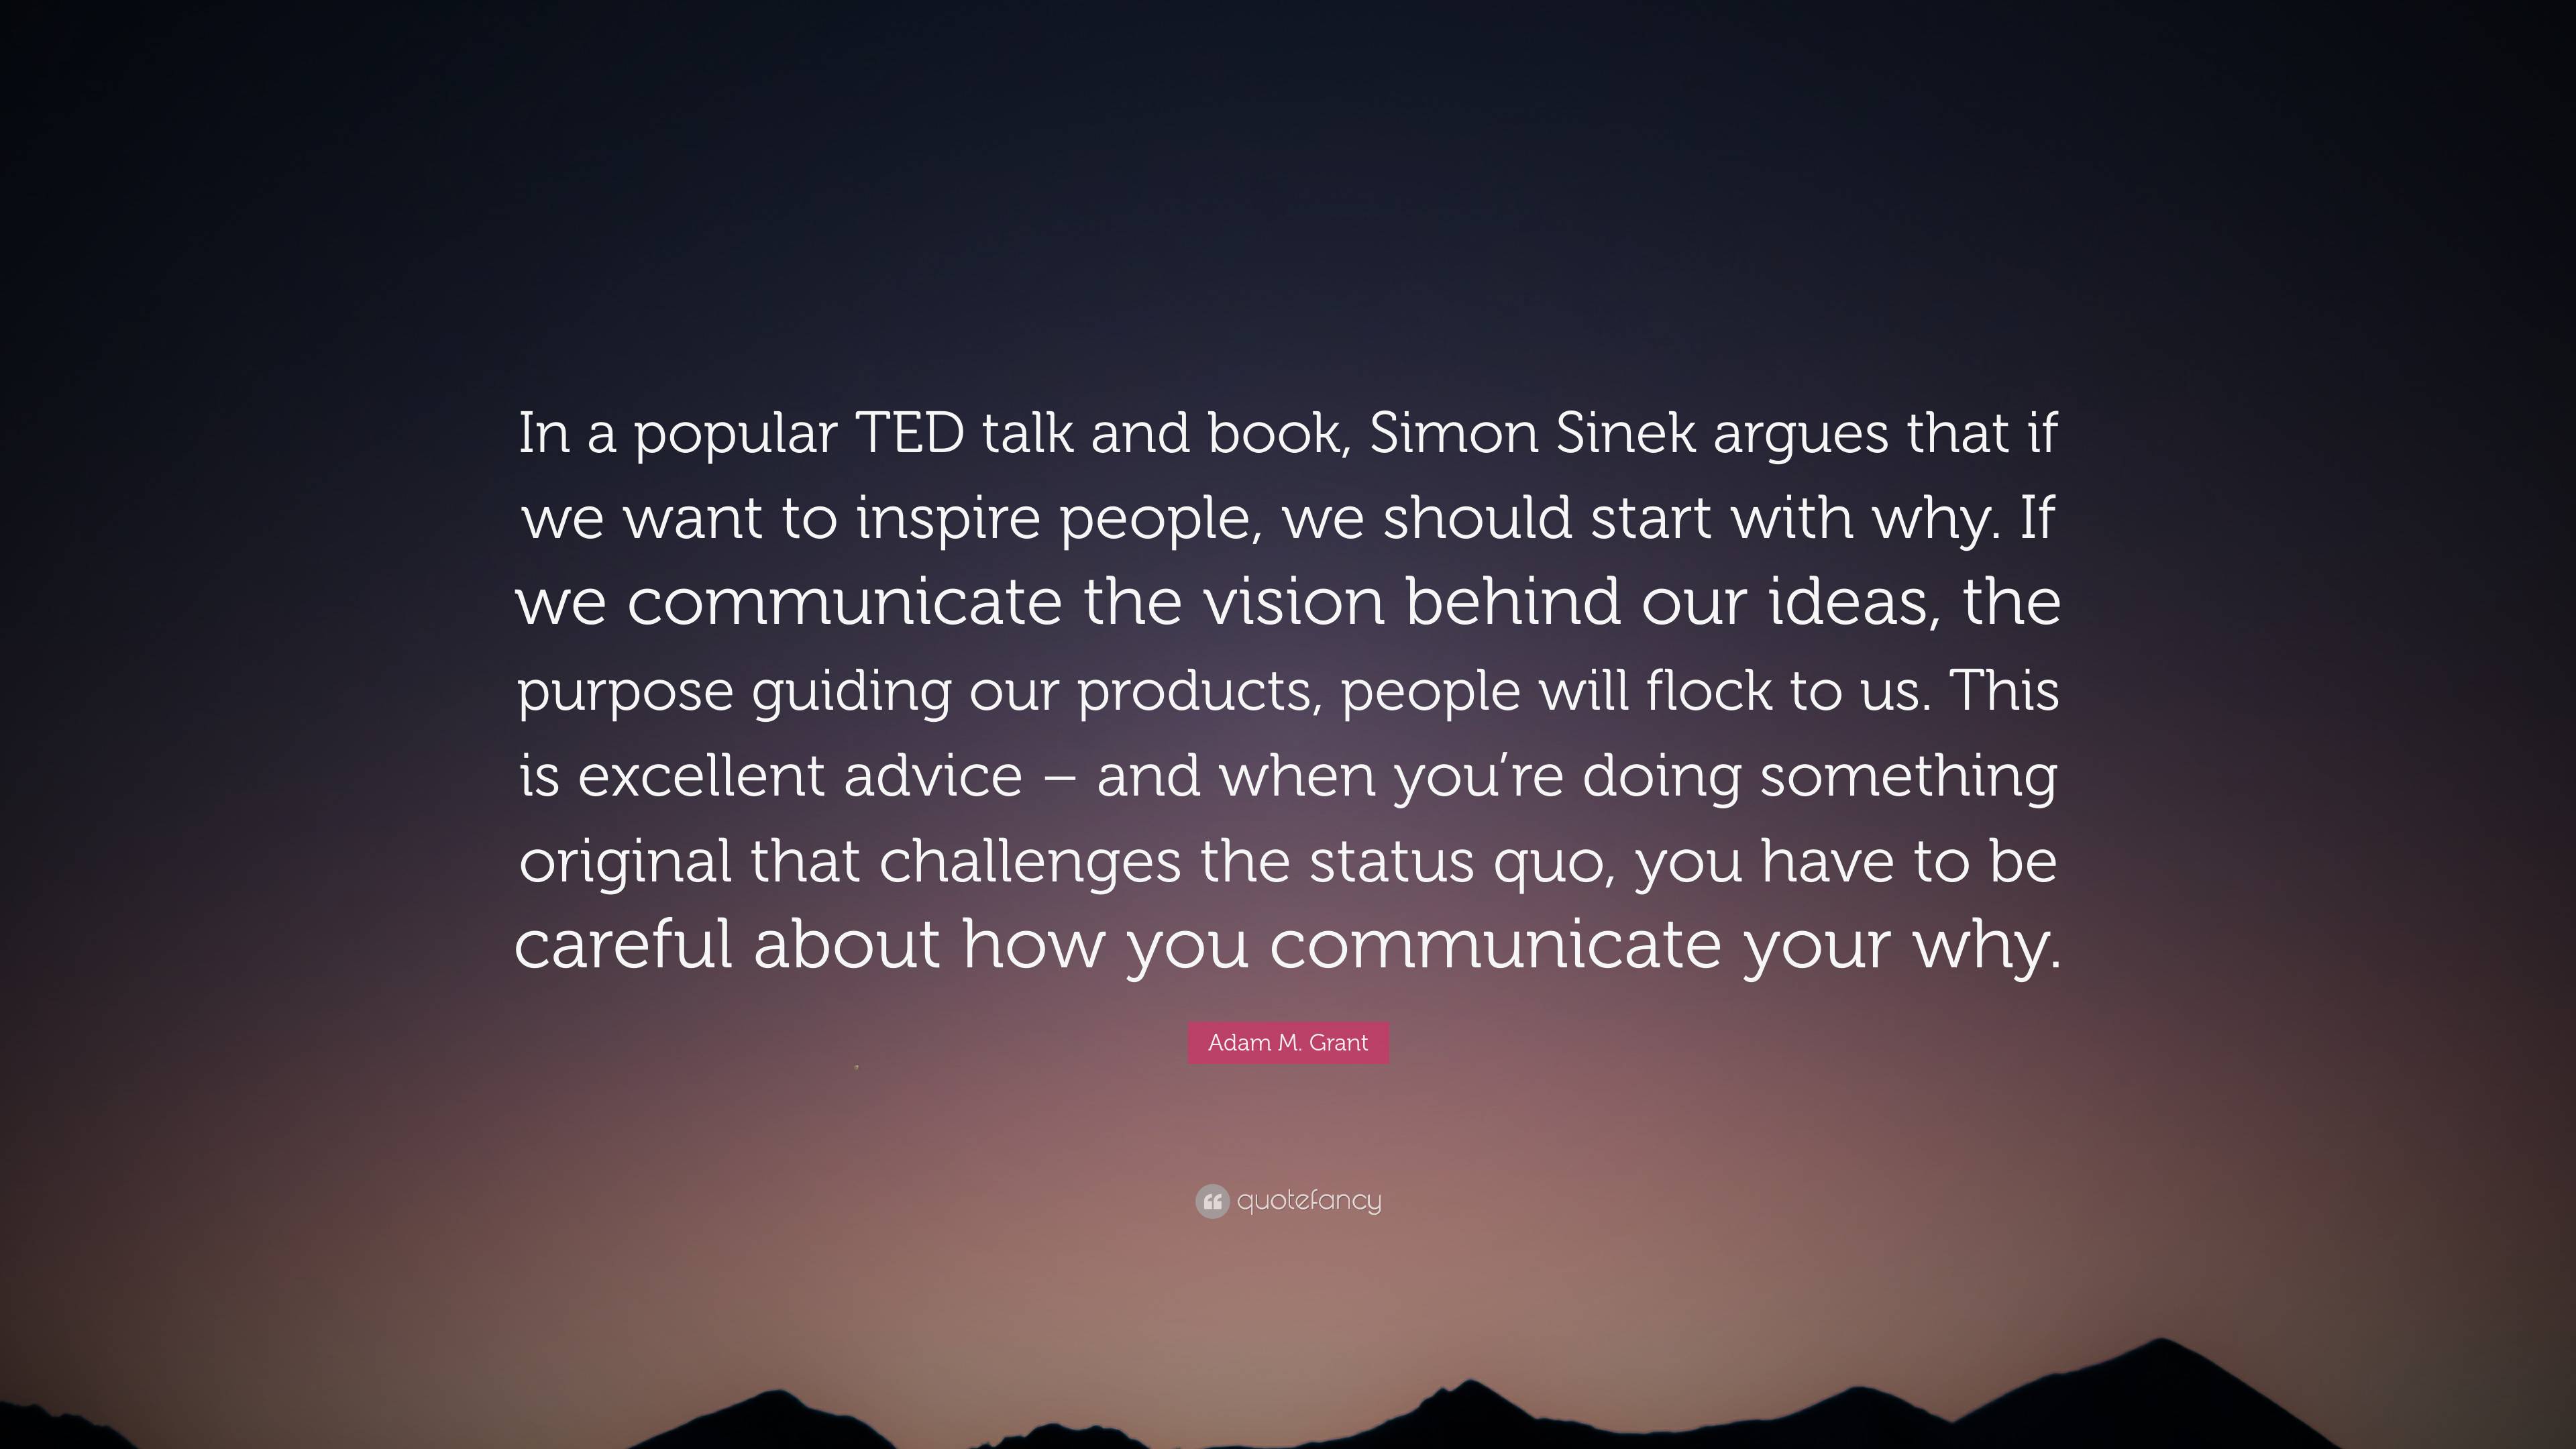 Adam M. Grant Quote: “In a popular TED talk and book, Simon Sinek argues  that if we want to inspire people, we should start with why. If we co”